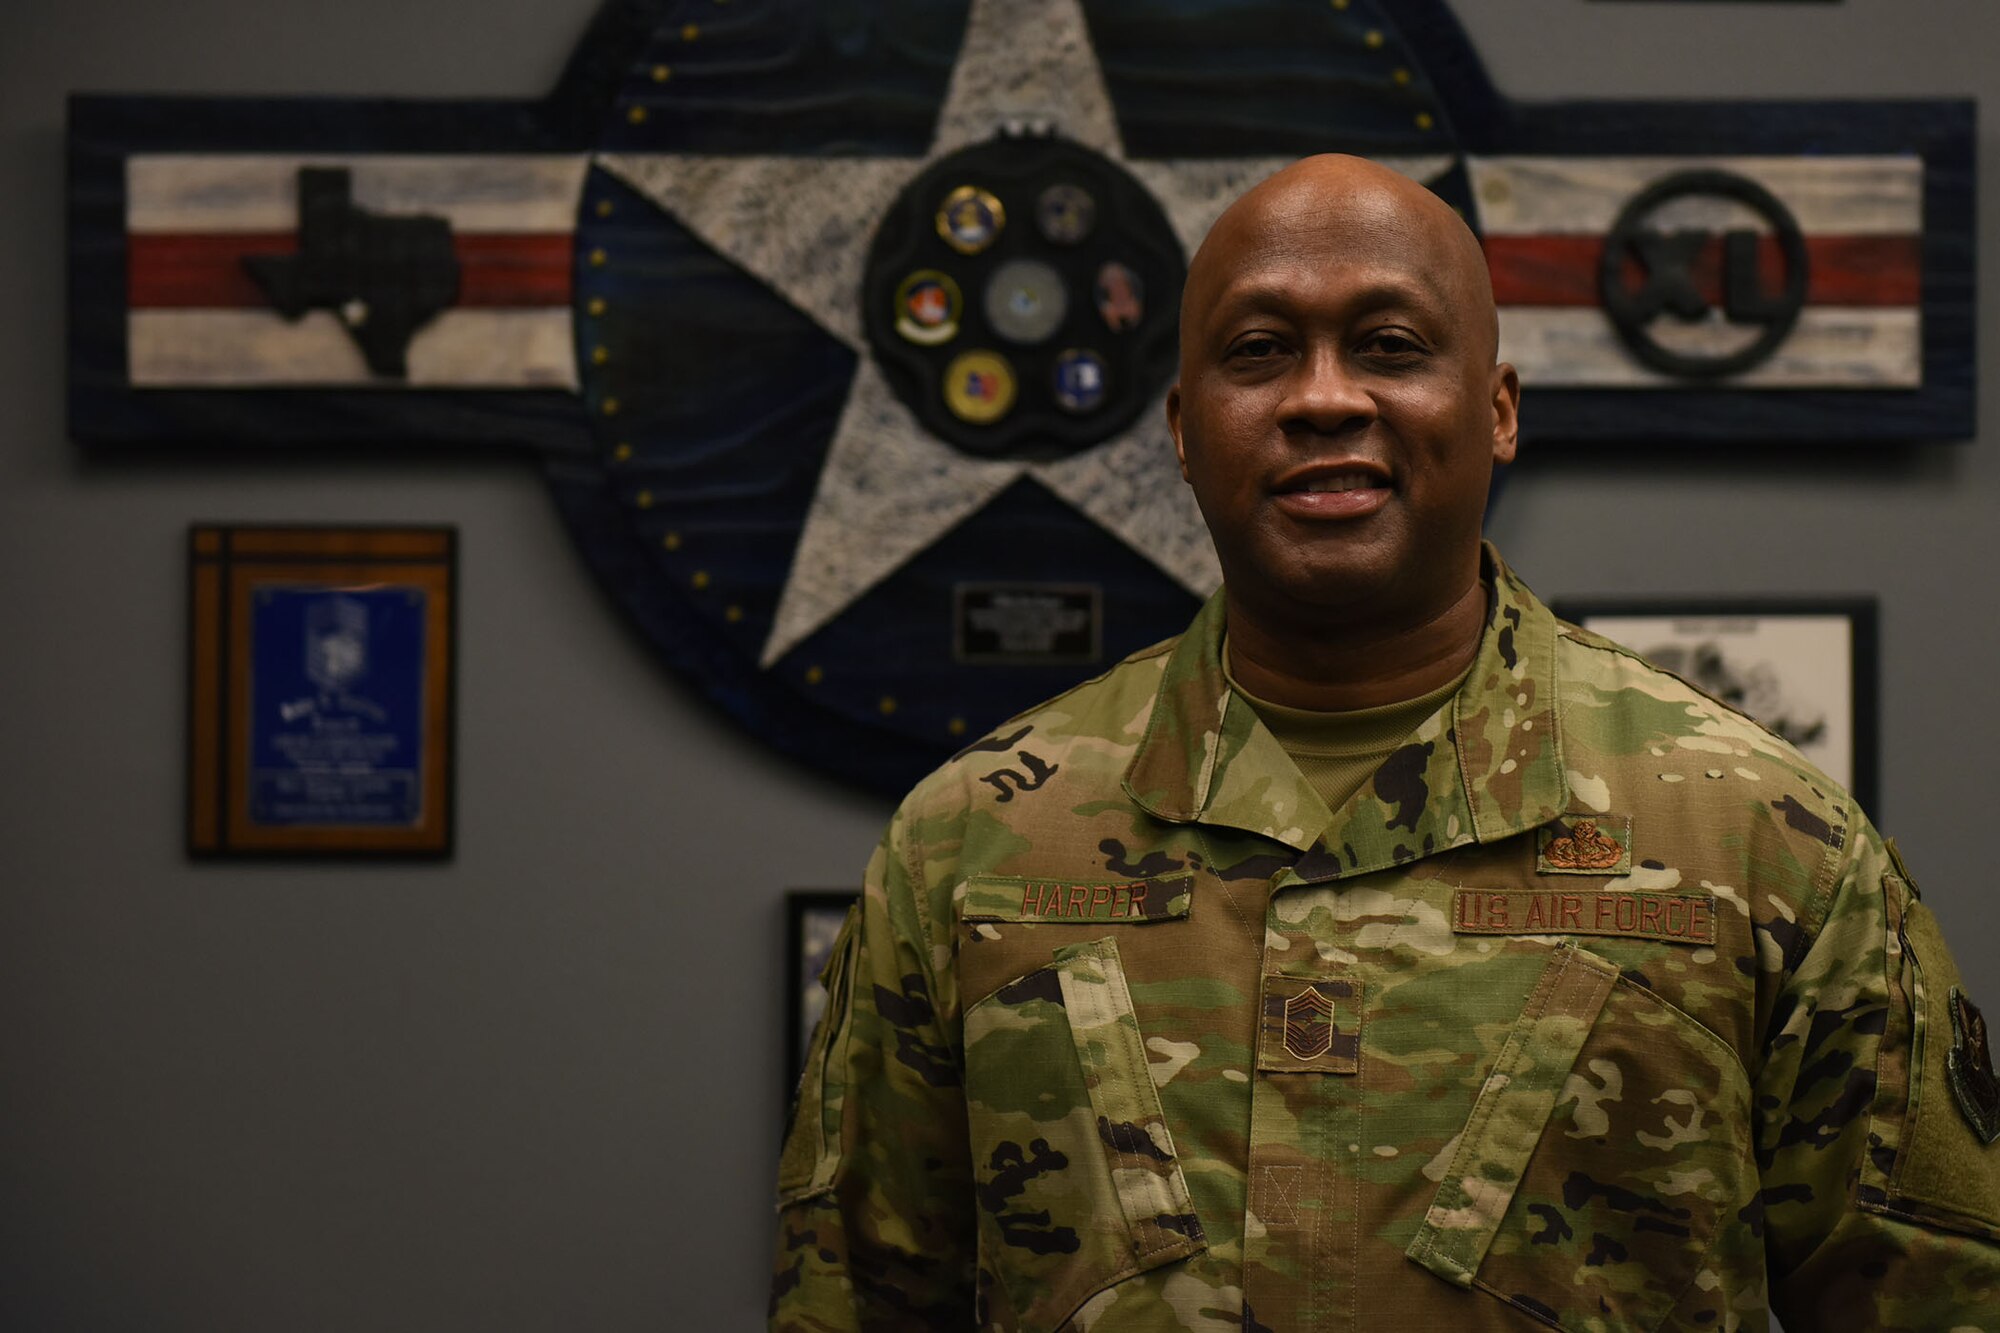 Chief Master Sgt. Ronald Harper poses for a portrait photo inside of his office, looks directly at the camera and smiles.